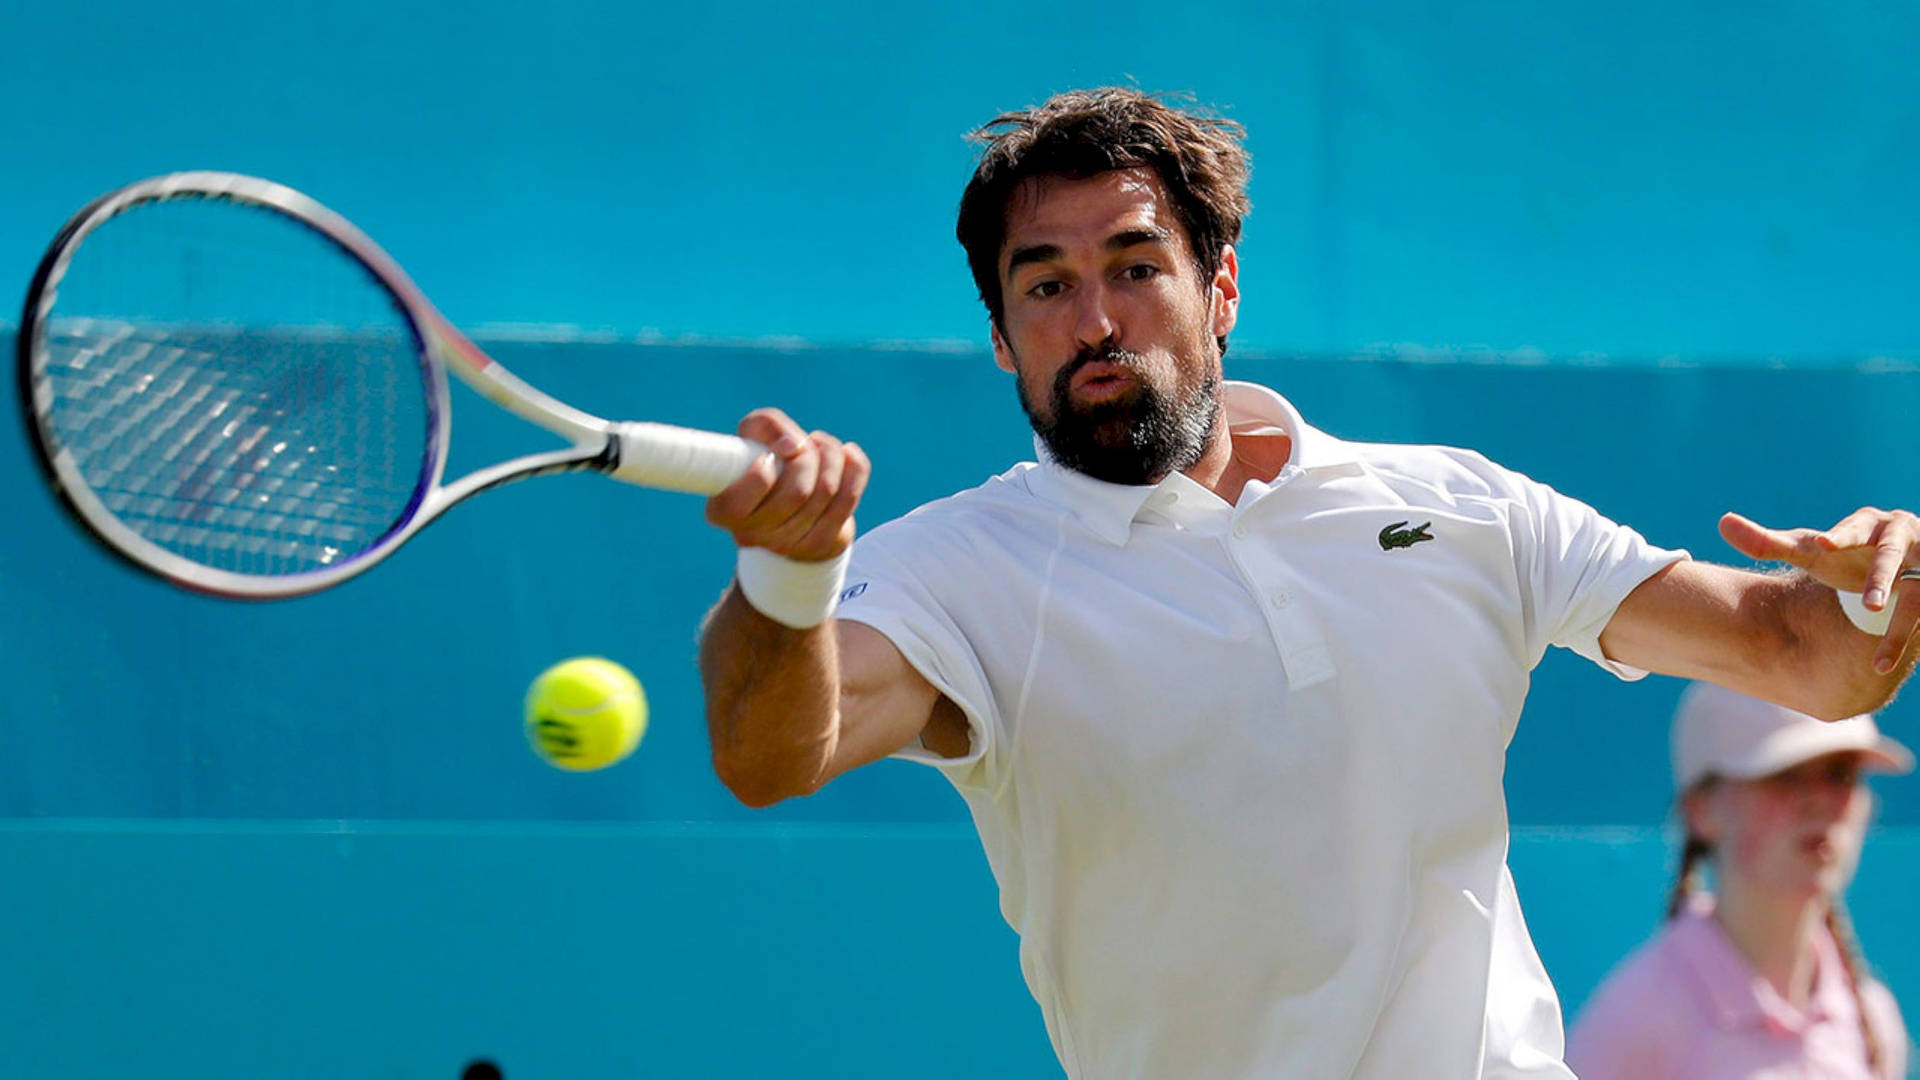 Jeremy Chardy Reaching For Ball Wallpaper